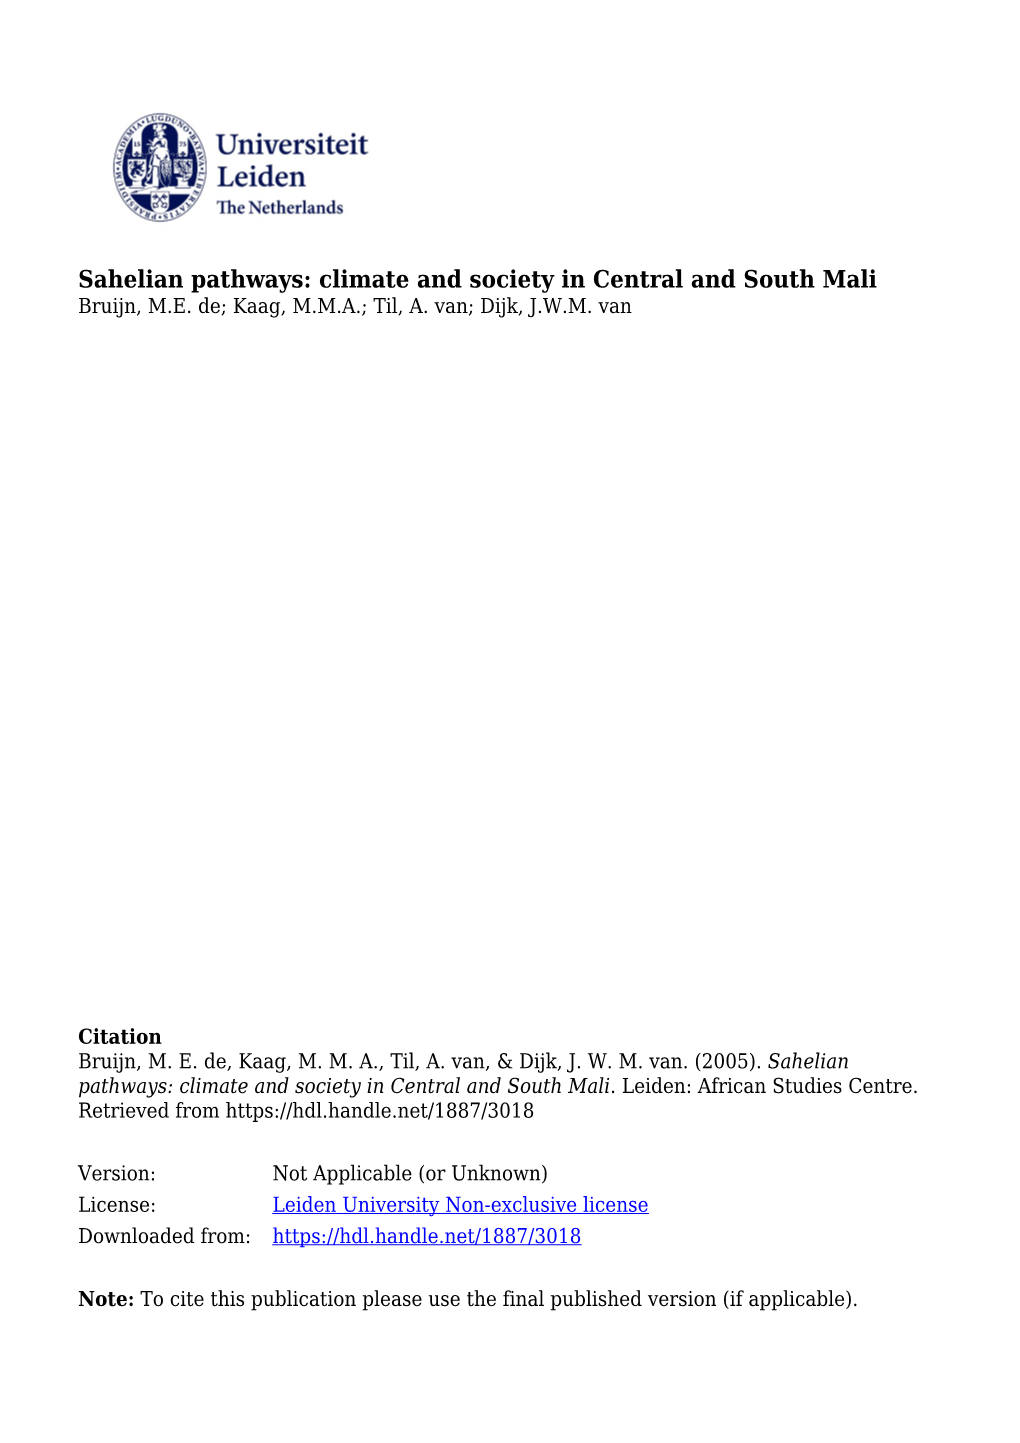 Sahelian Pathways: Climate and Society in Central and South Mali Bruijn, M.E